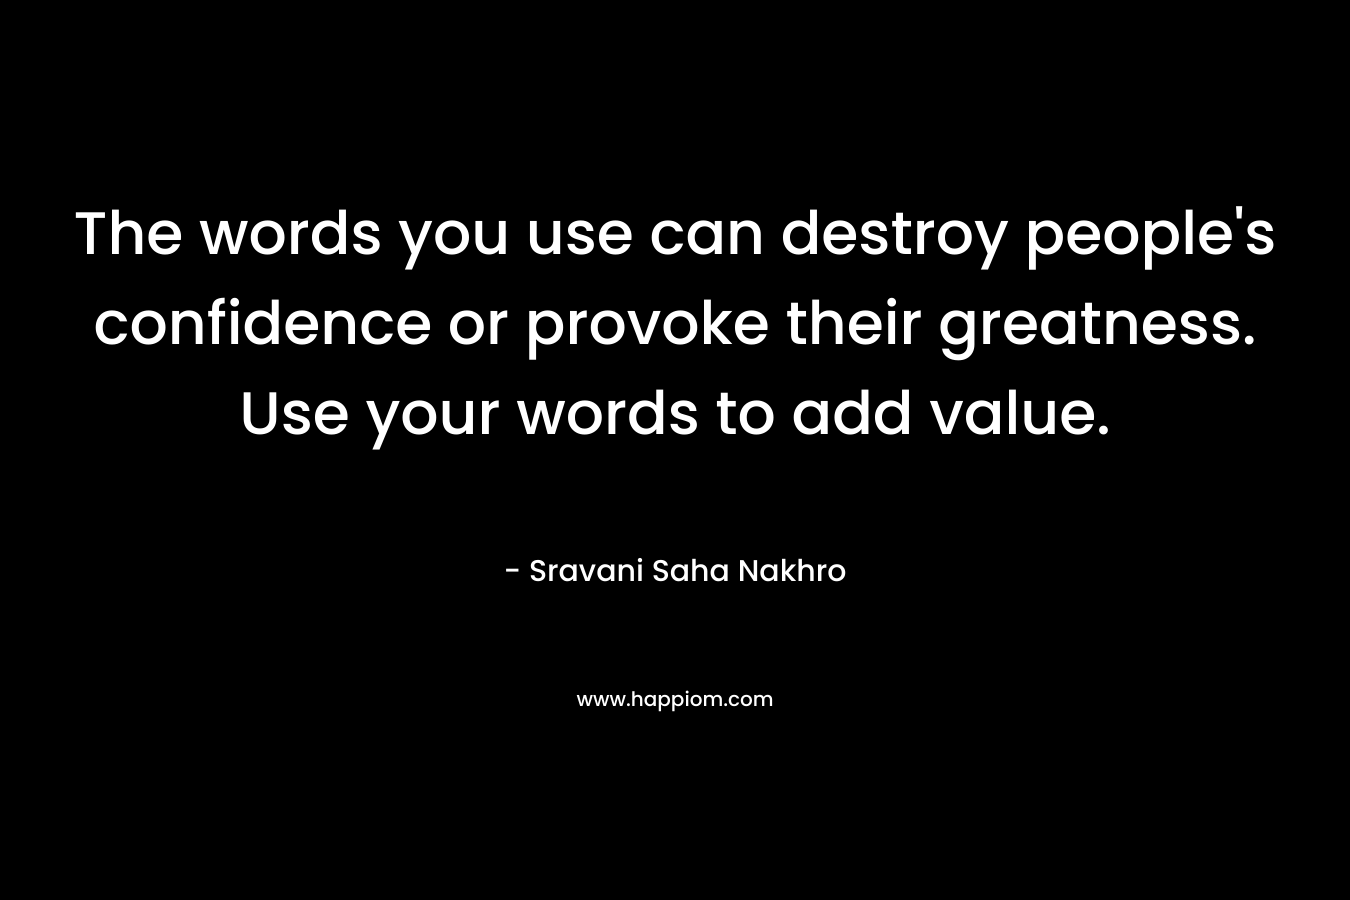 The words you use can destroy people’s confidence or provoke their greatness. Use your words to add value. – Sravani Saha Nakhro